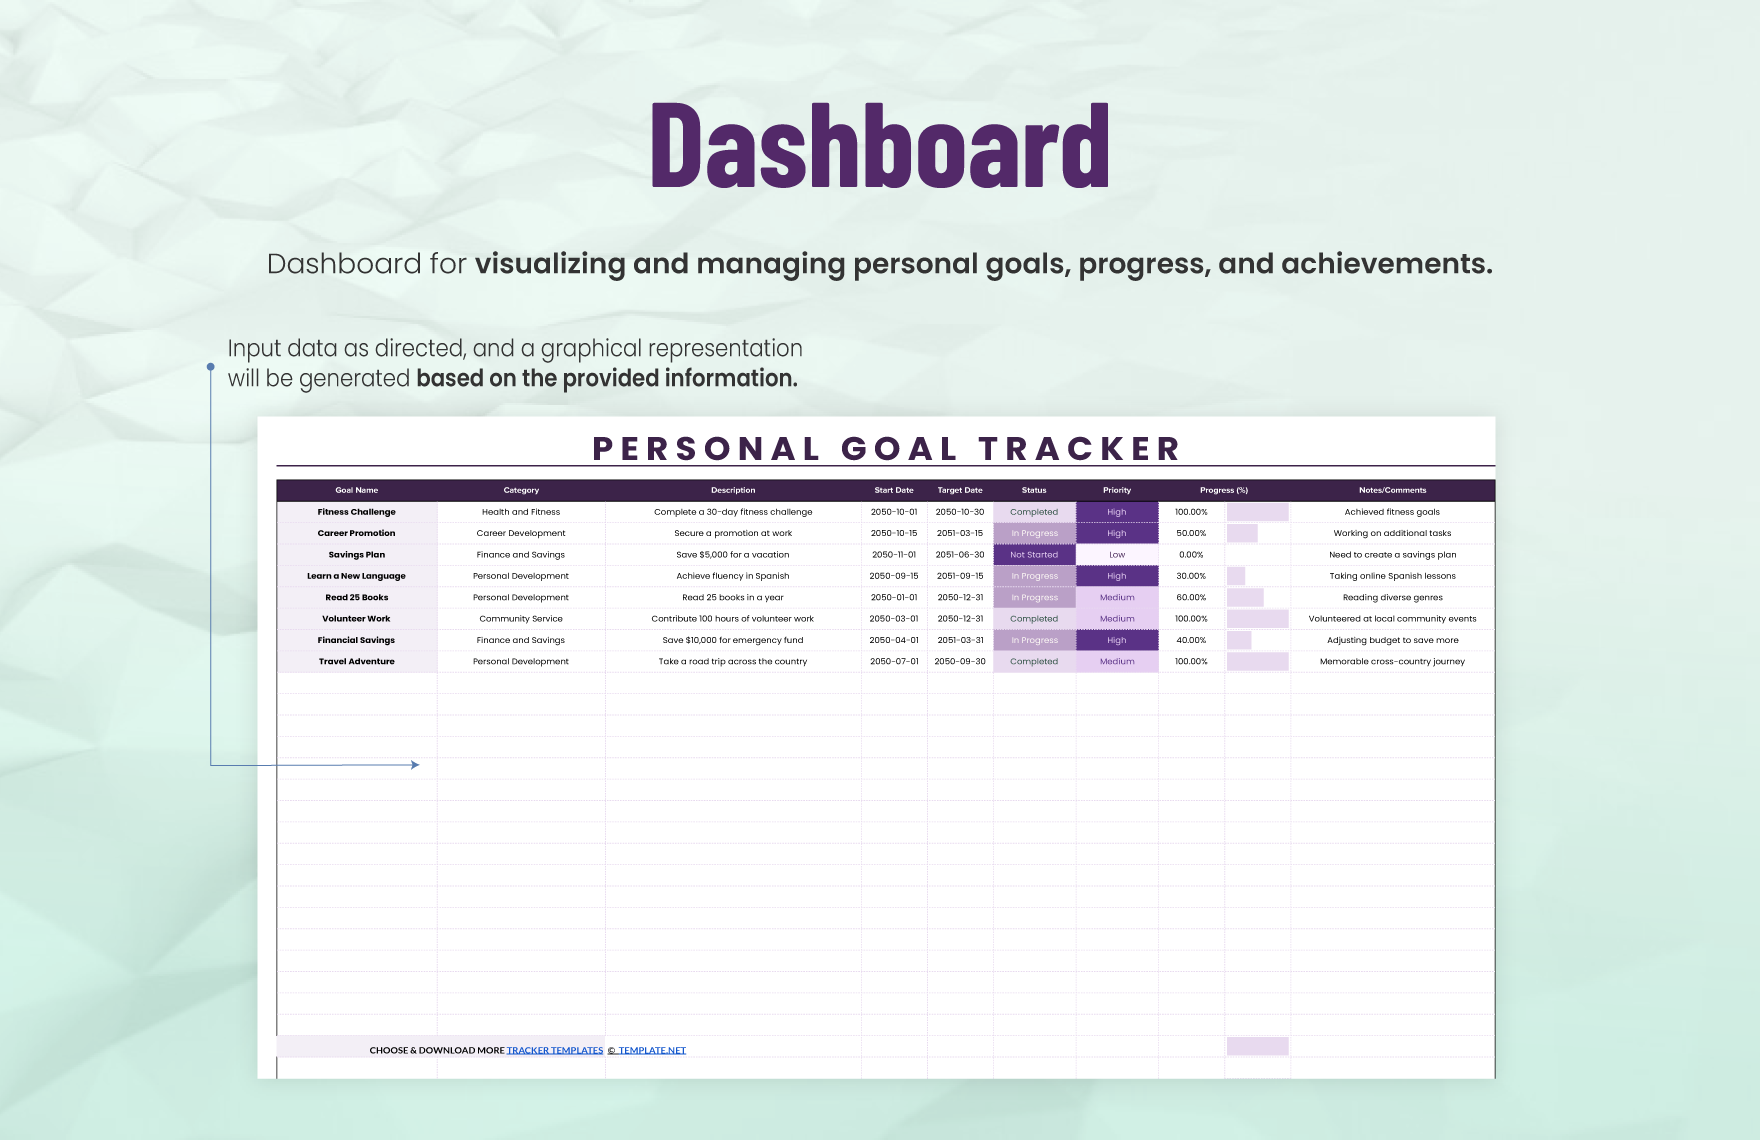 Personal Goal Tracker Template